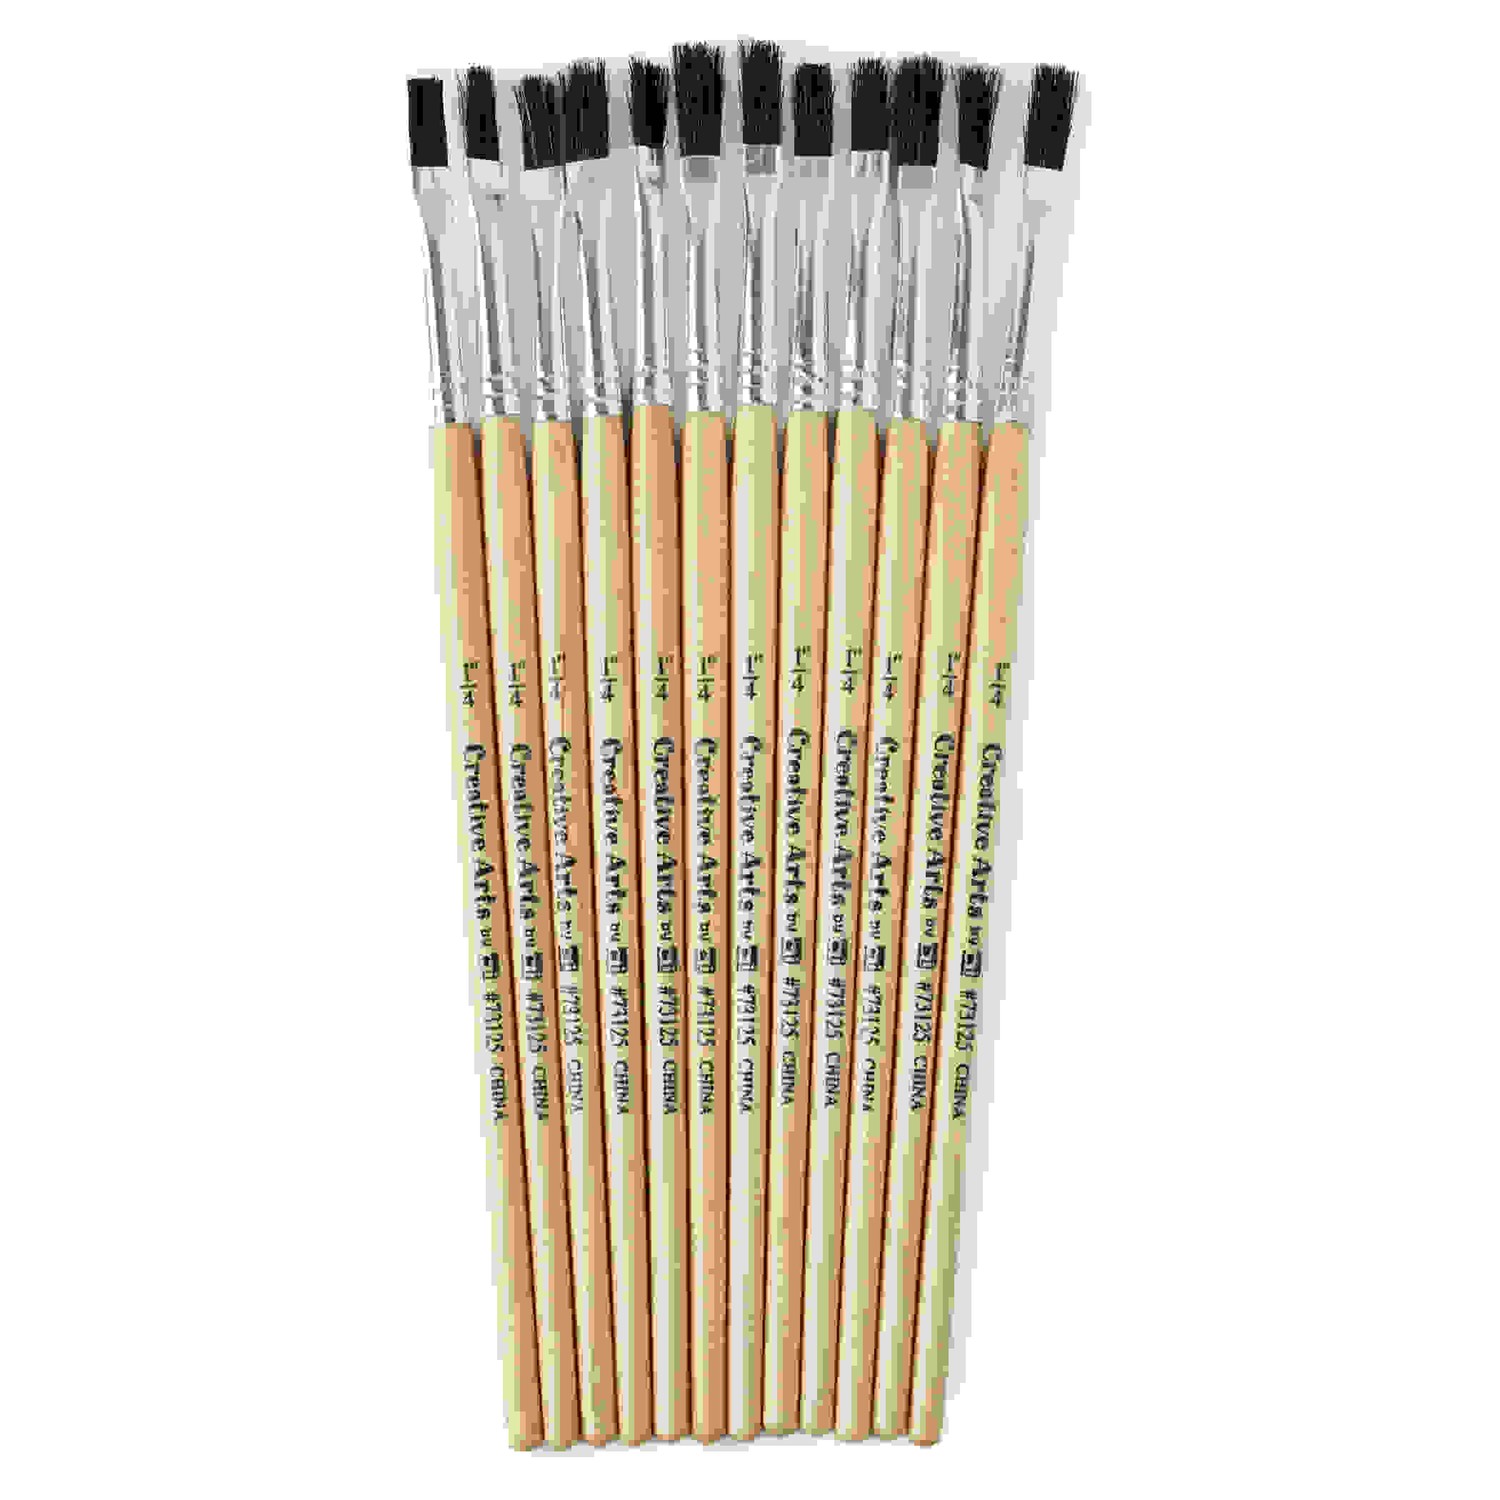 Easle Brushes, 1/4" Wide, Stubby Handle, Natural Bristles, Pack of 12